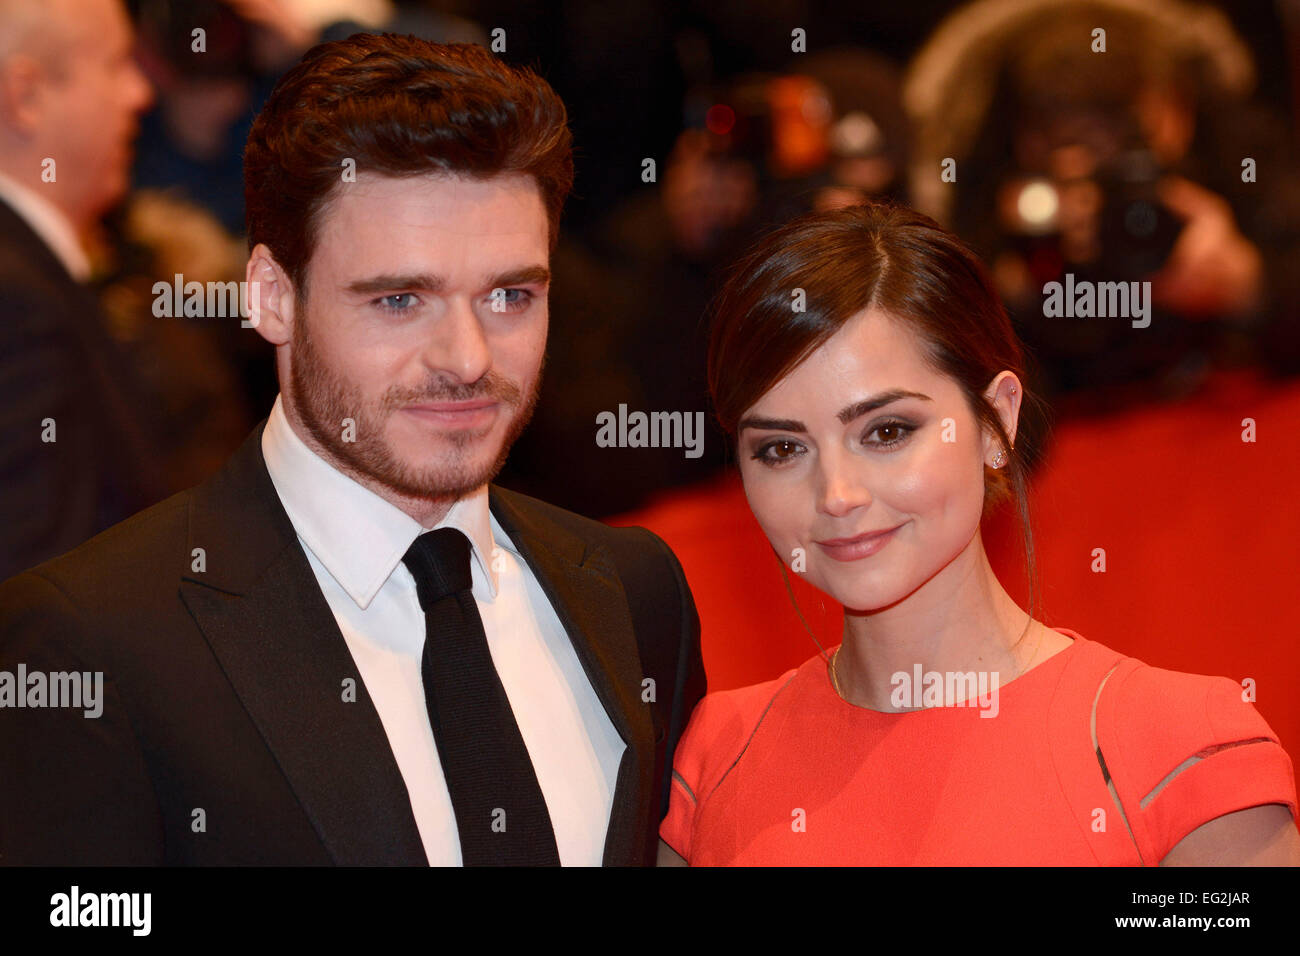 Richard Madden and Jenna-Louise Coleman attending the 'Cinderella' premiere at the 65th Berlin International Film Festival / Berlinale 2015 on February 13, 2015. Stock Photo